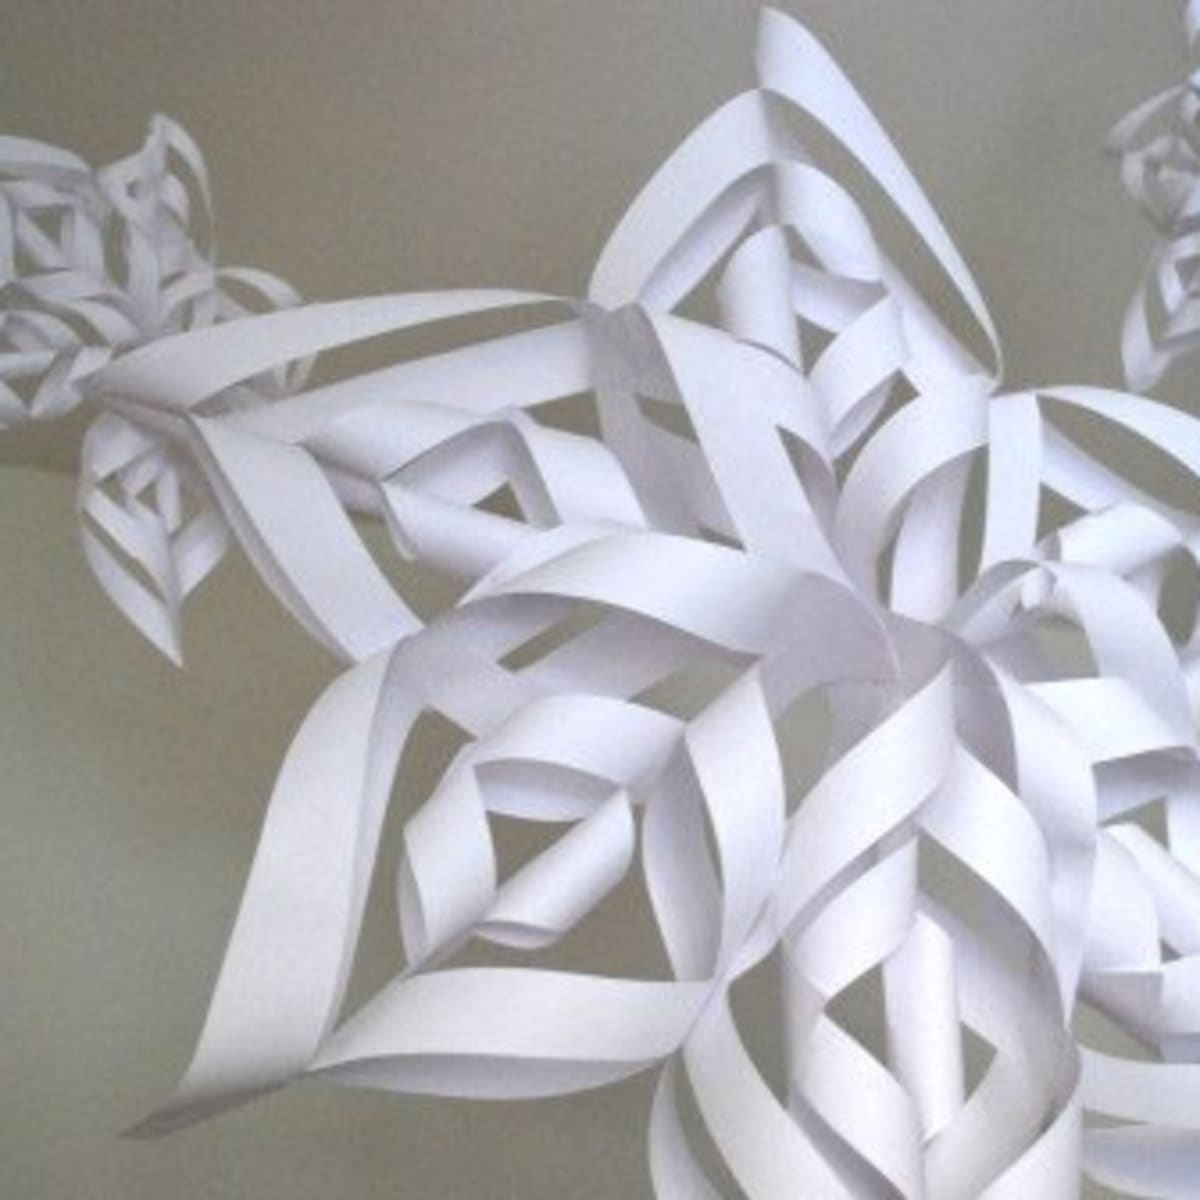 Easy-to-make 3D Snowflakes Tips